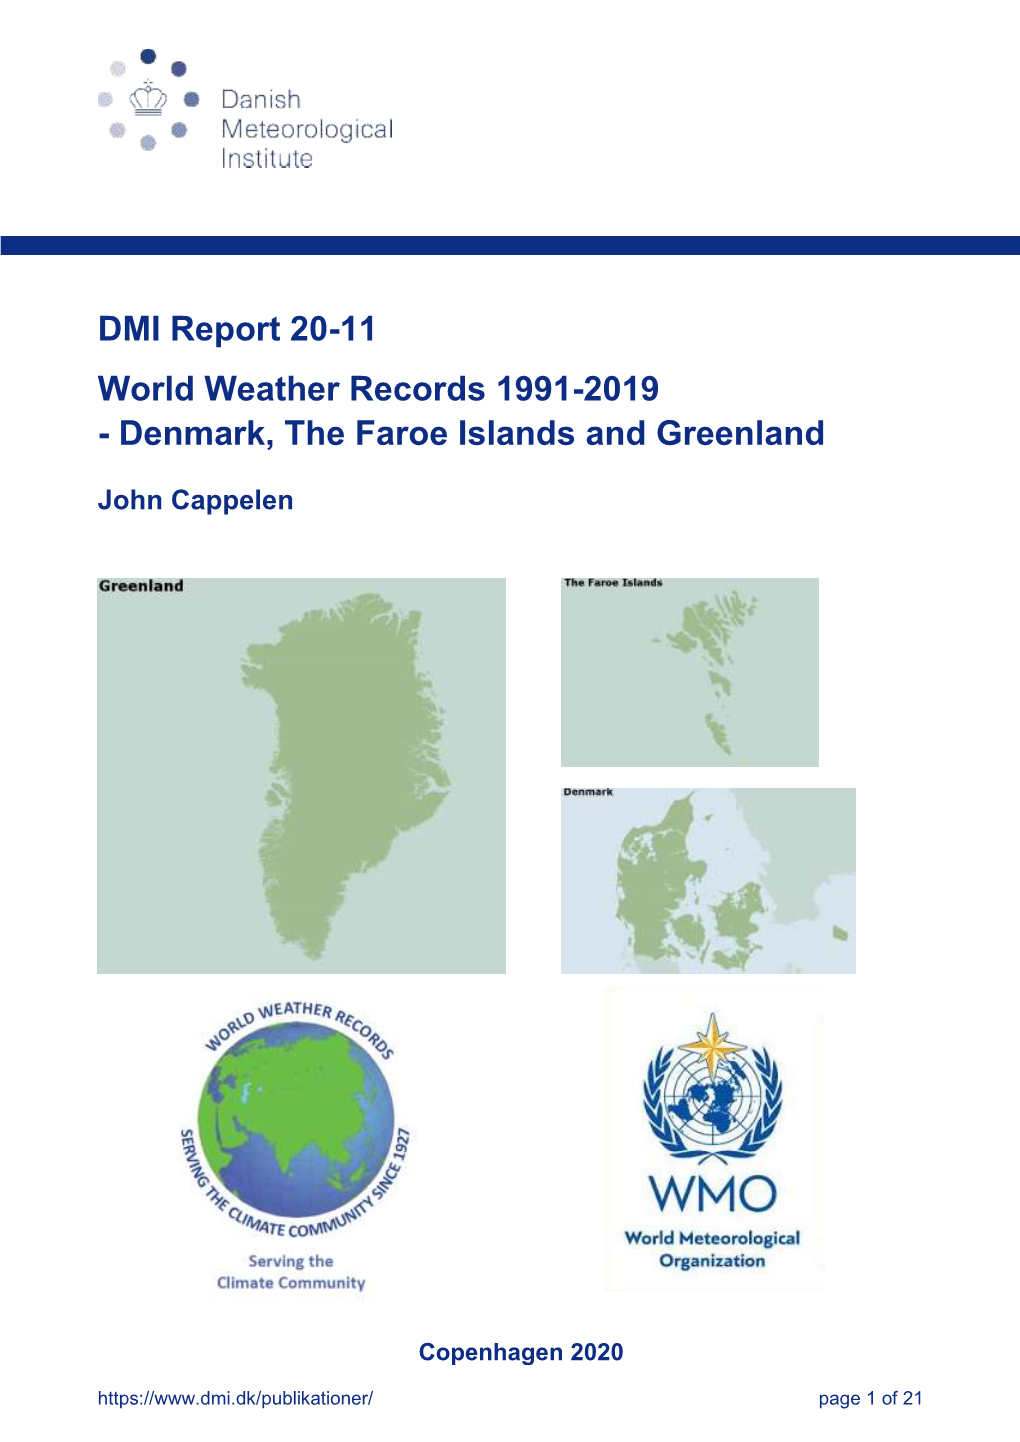 DMI Report 20-11 World Weather Records 1991-2019 - Denmark, the Faroe Islands and Greenland